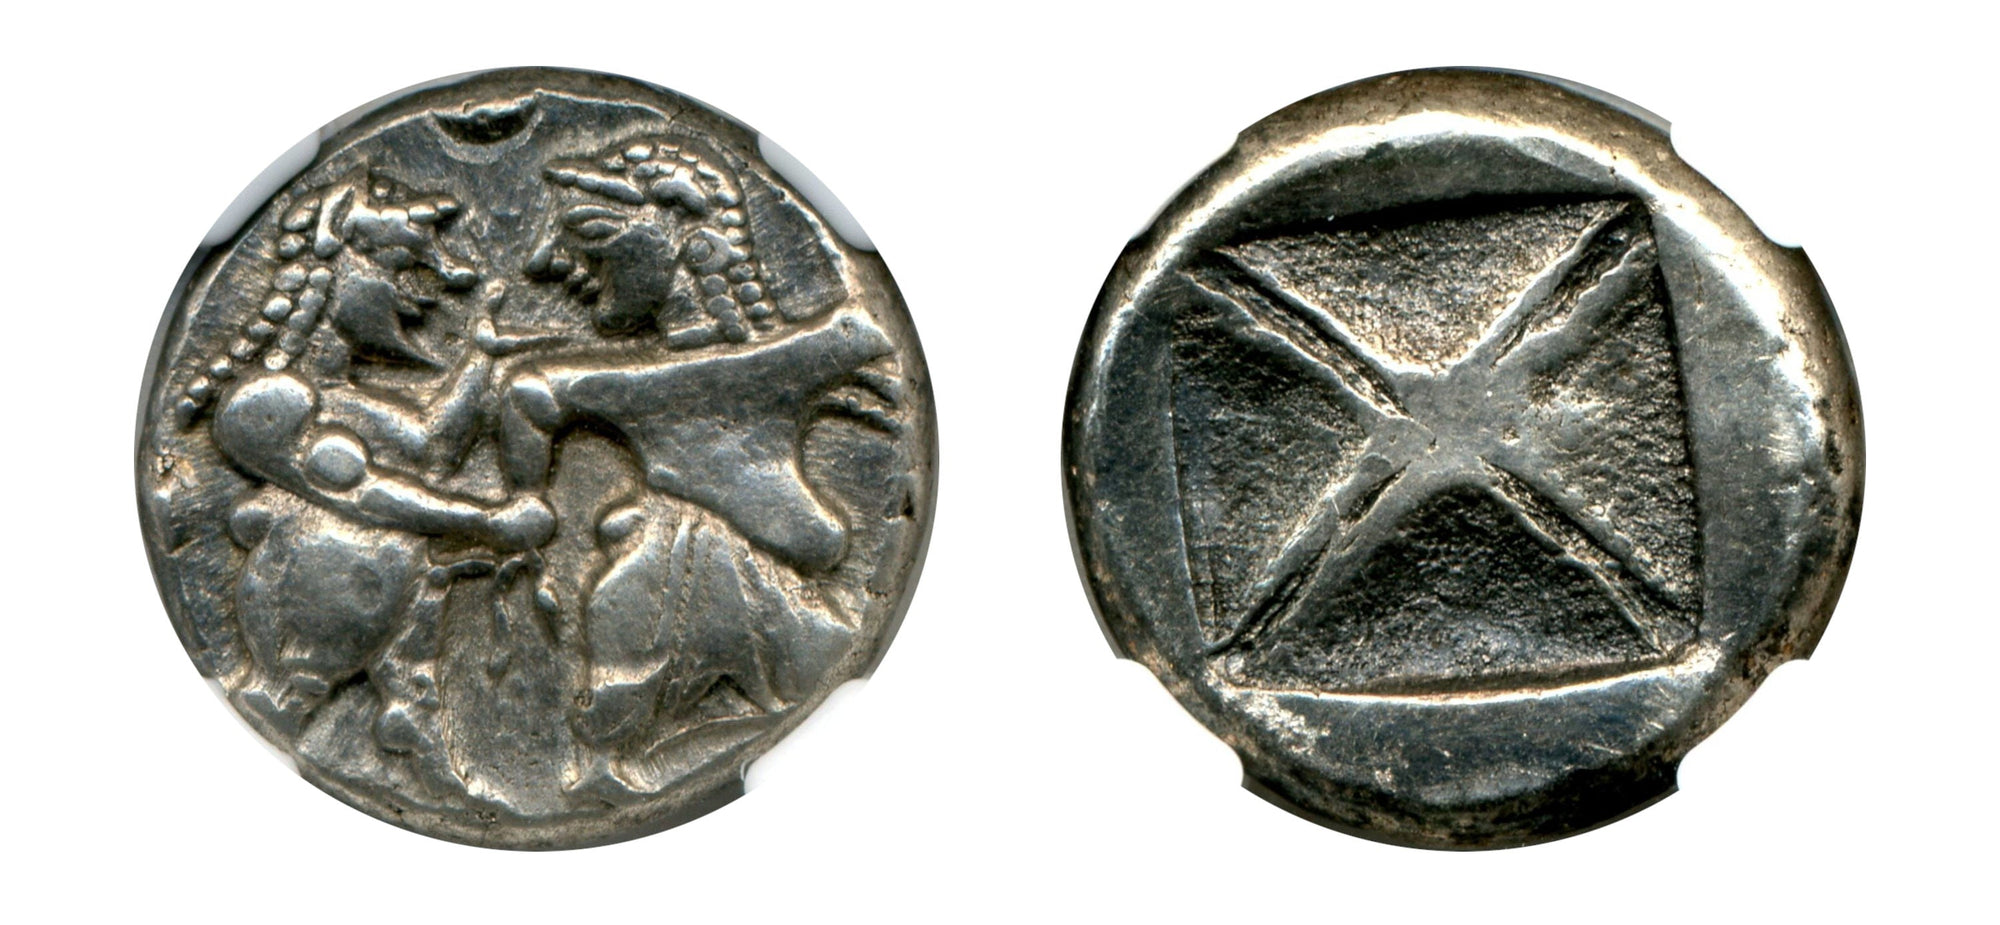 525-480 BC-Silver Stater Macedon, Siris Satyr Abducts Nymph NGC CH XF* Strk 5/5 Surf 4/5 - Hard Asset Management, Inc